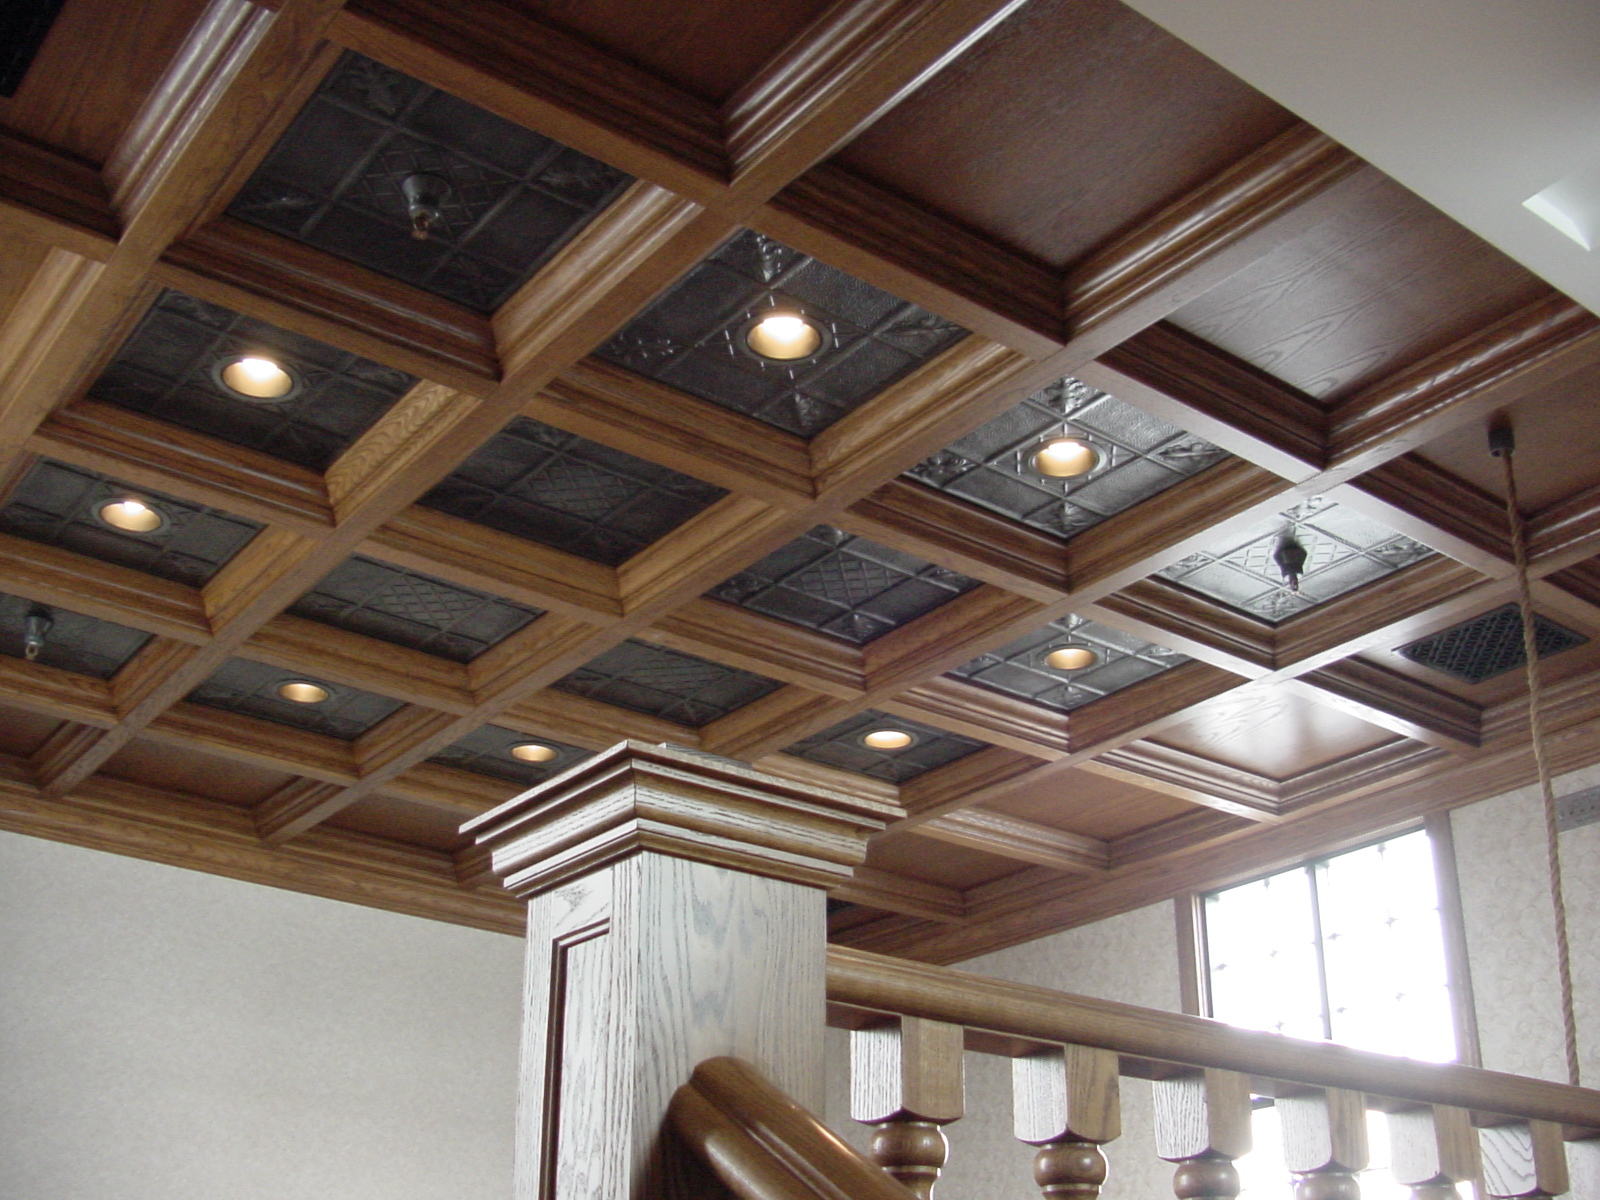 Ceiling Tile With Wood Beams - HD Wallpaper 